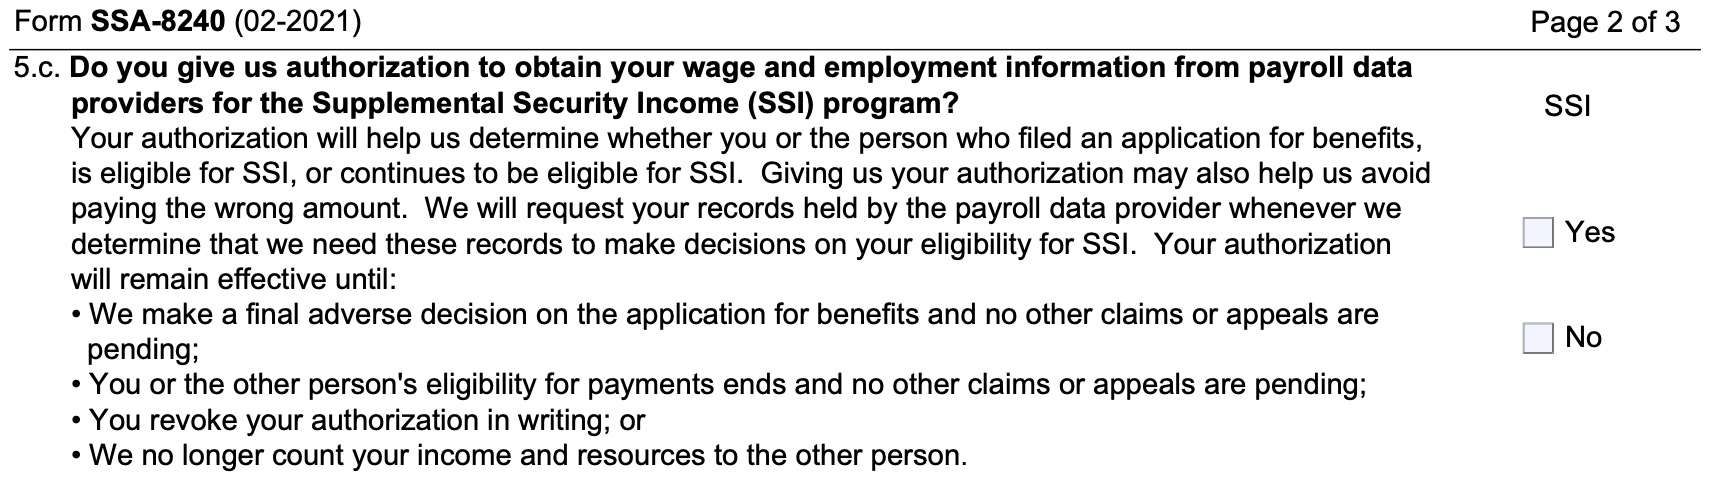 ssi question